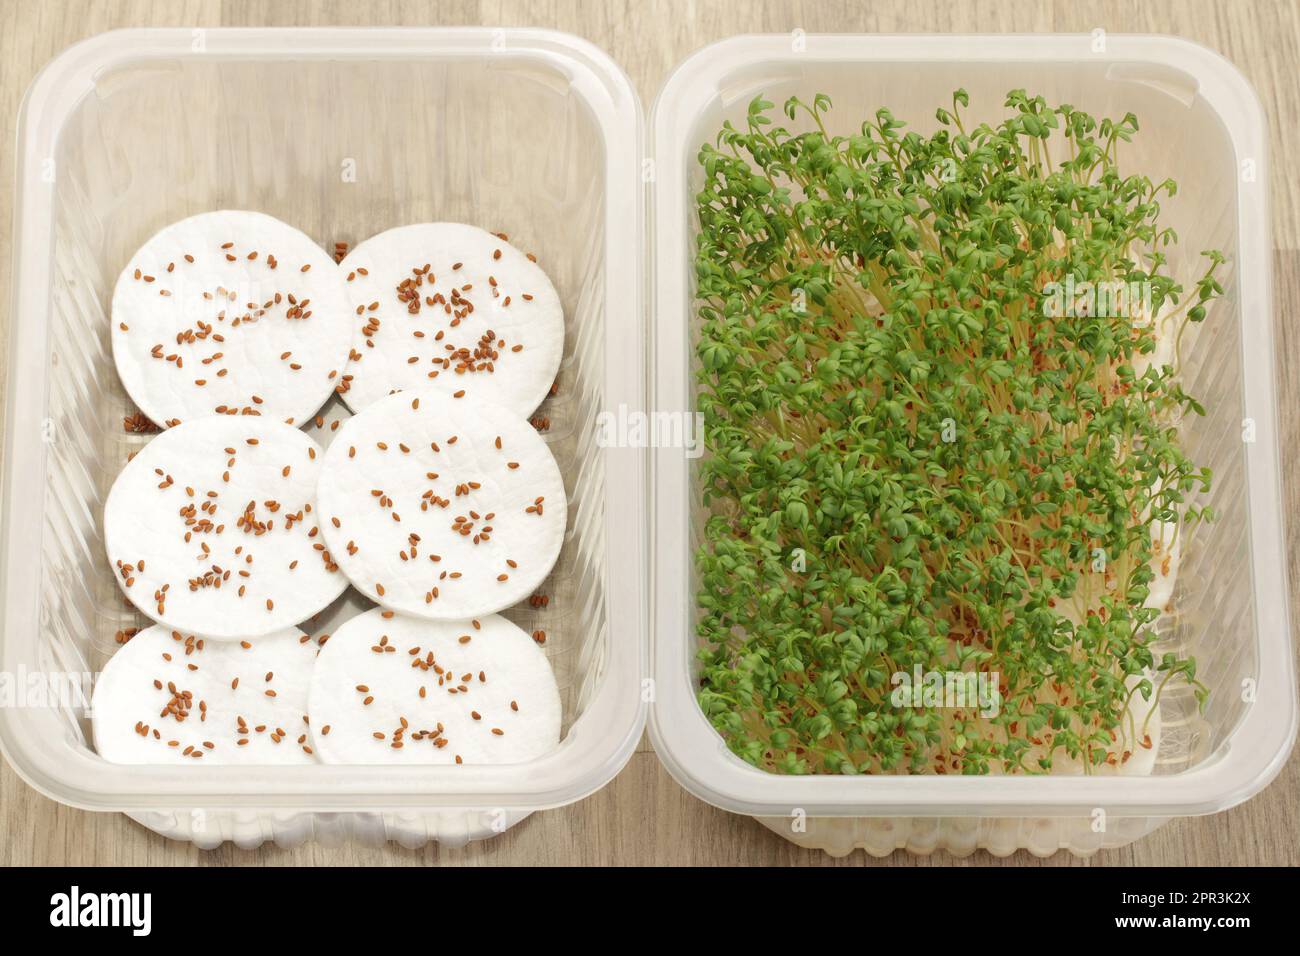 Growing garden cress on absorbent cotton pads and water at home. Garden cress seeds on cotton pads and garden cress sprouts few days later. Stock Photo